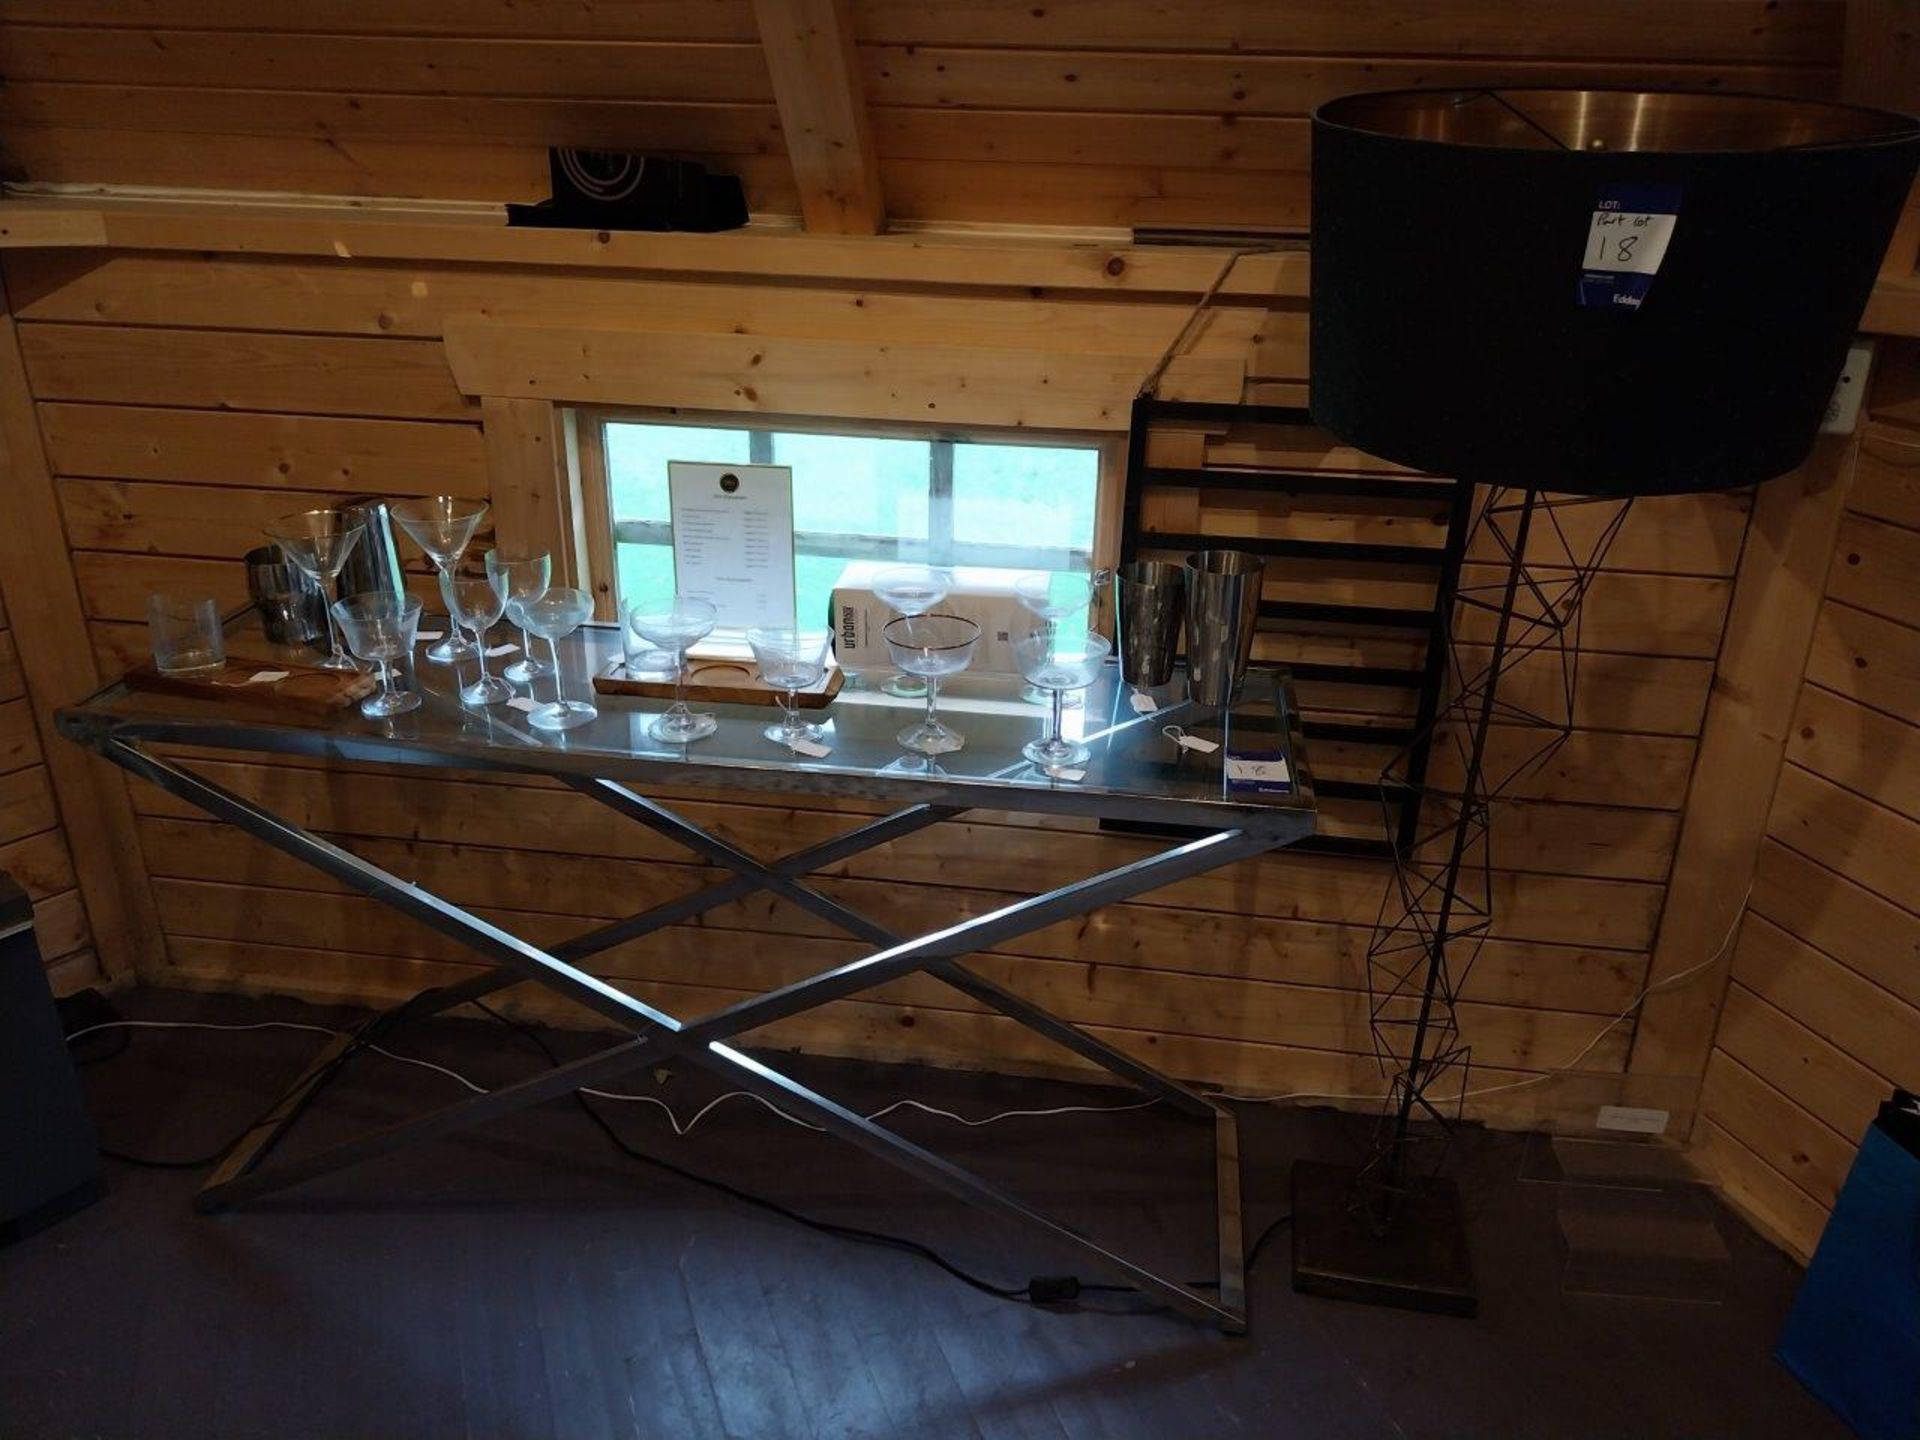 Chrome and Glass Topped Console Table, Floor Lamp and Quantity of Glasses